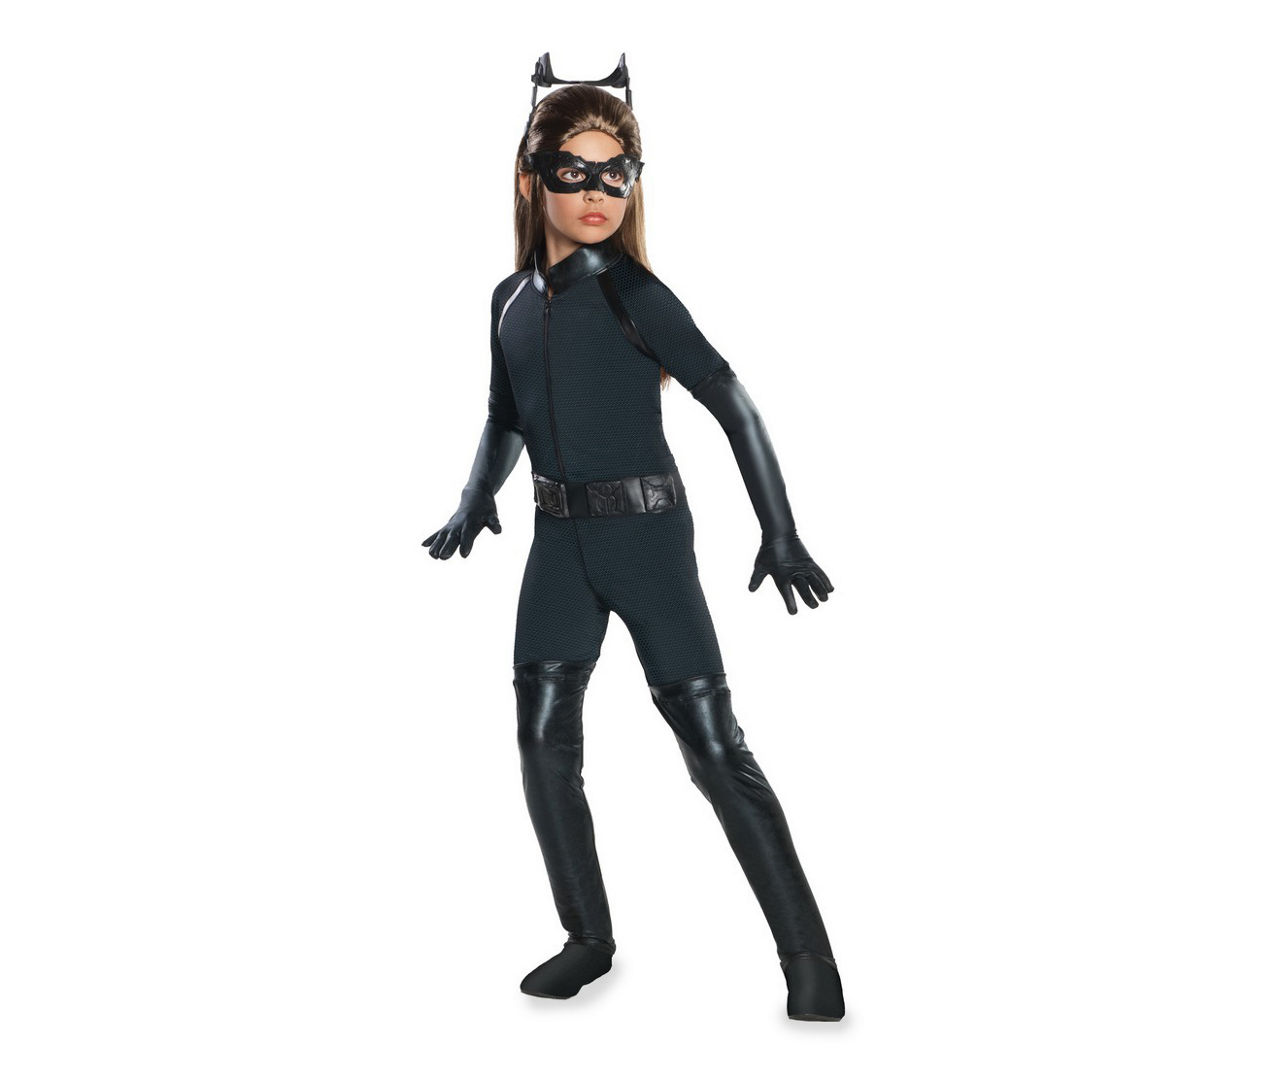 Kids Size S The Dark Knight Rises Deluxe Catwoman Costume